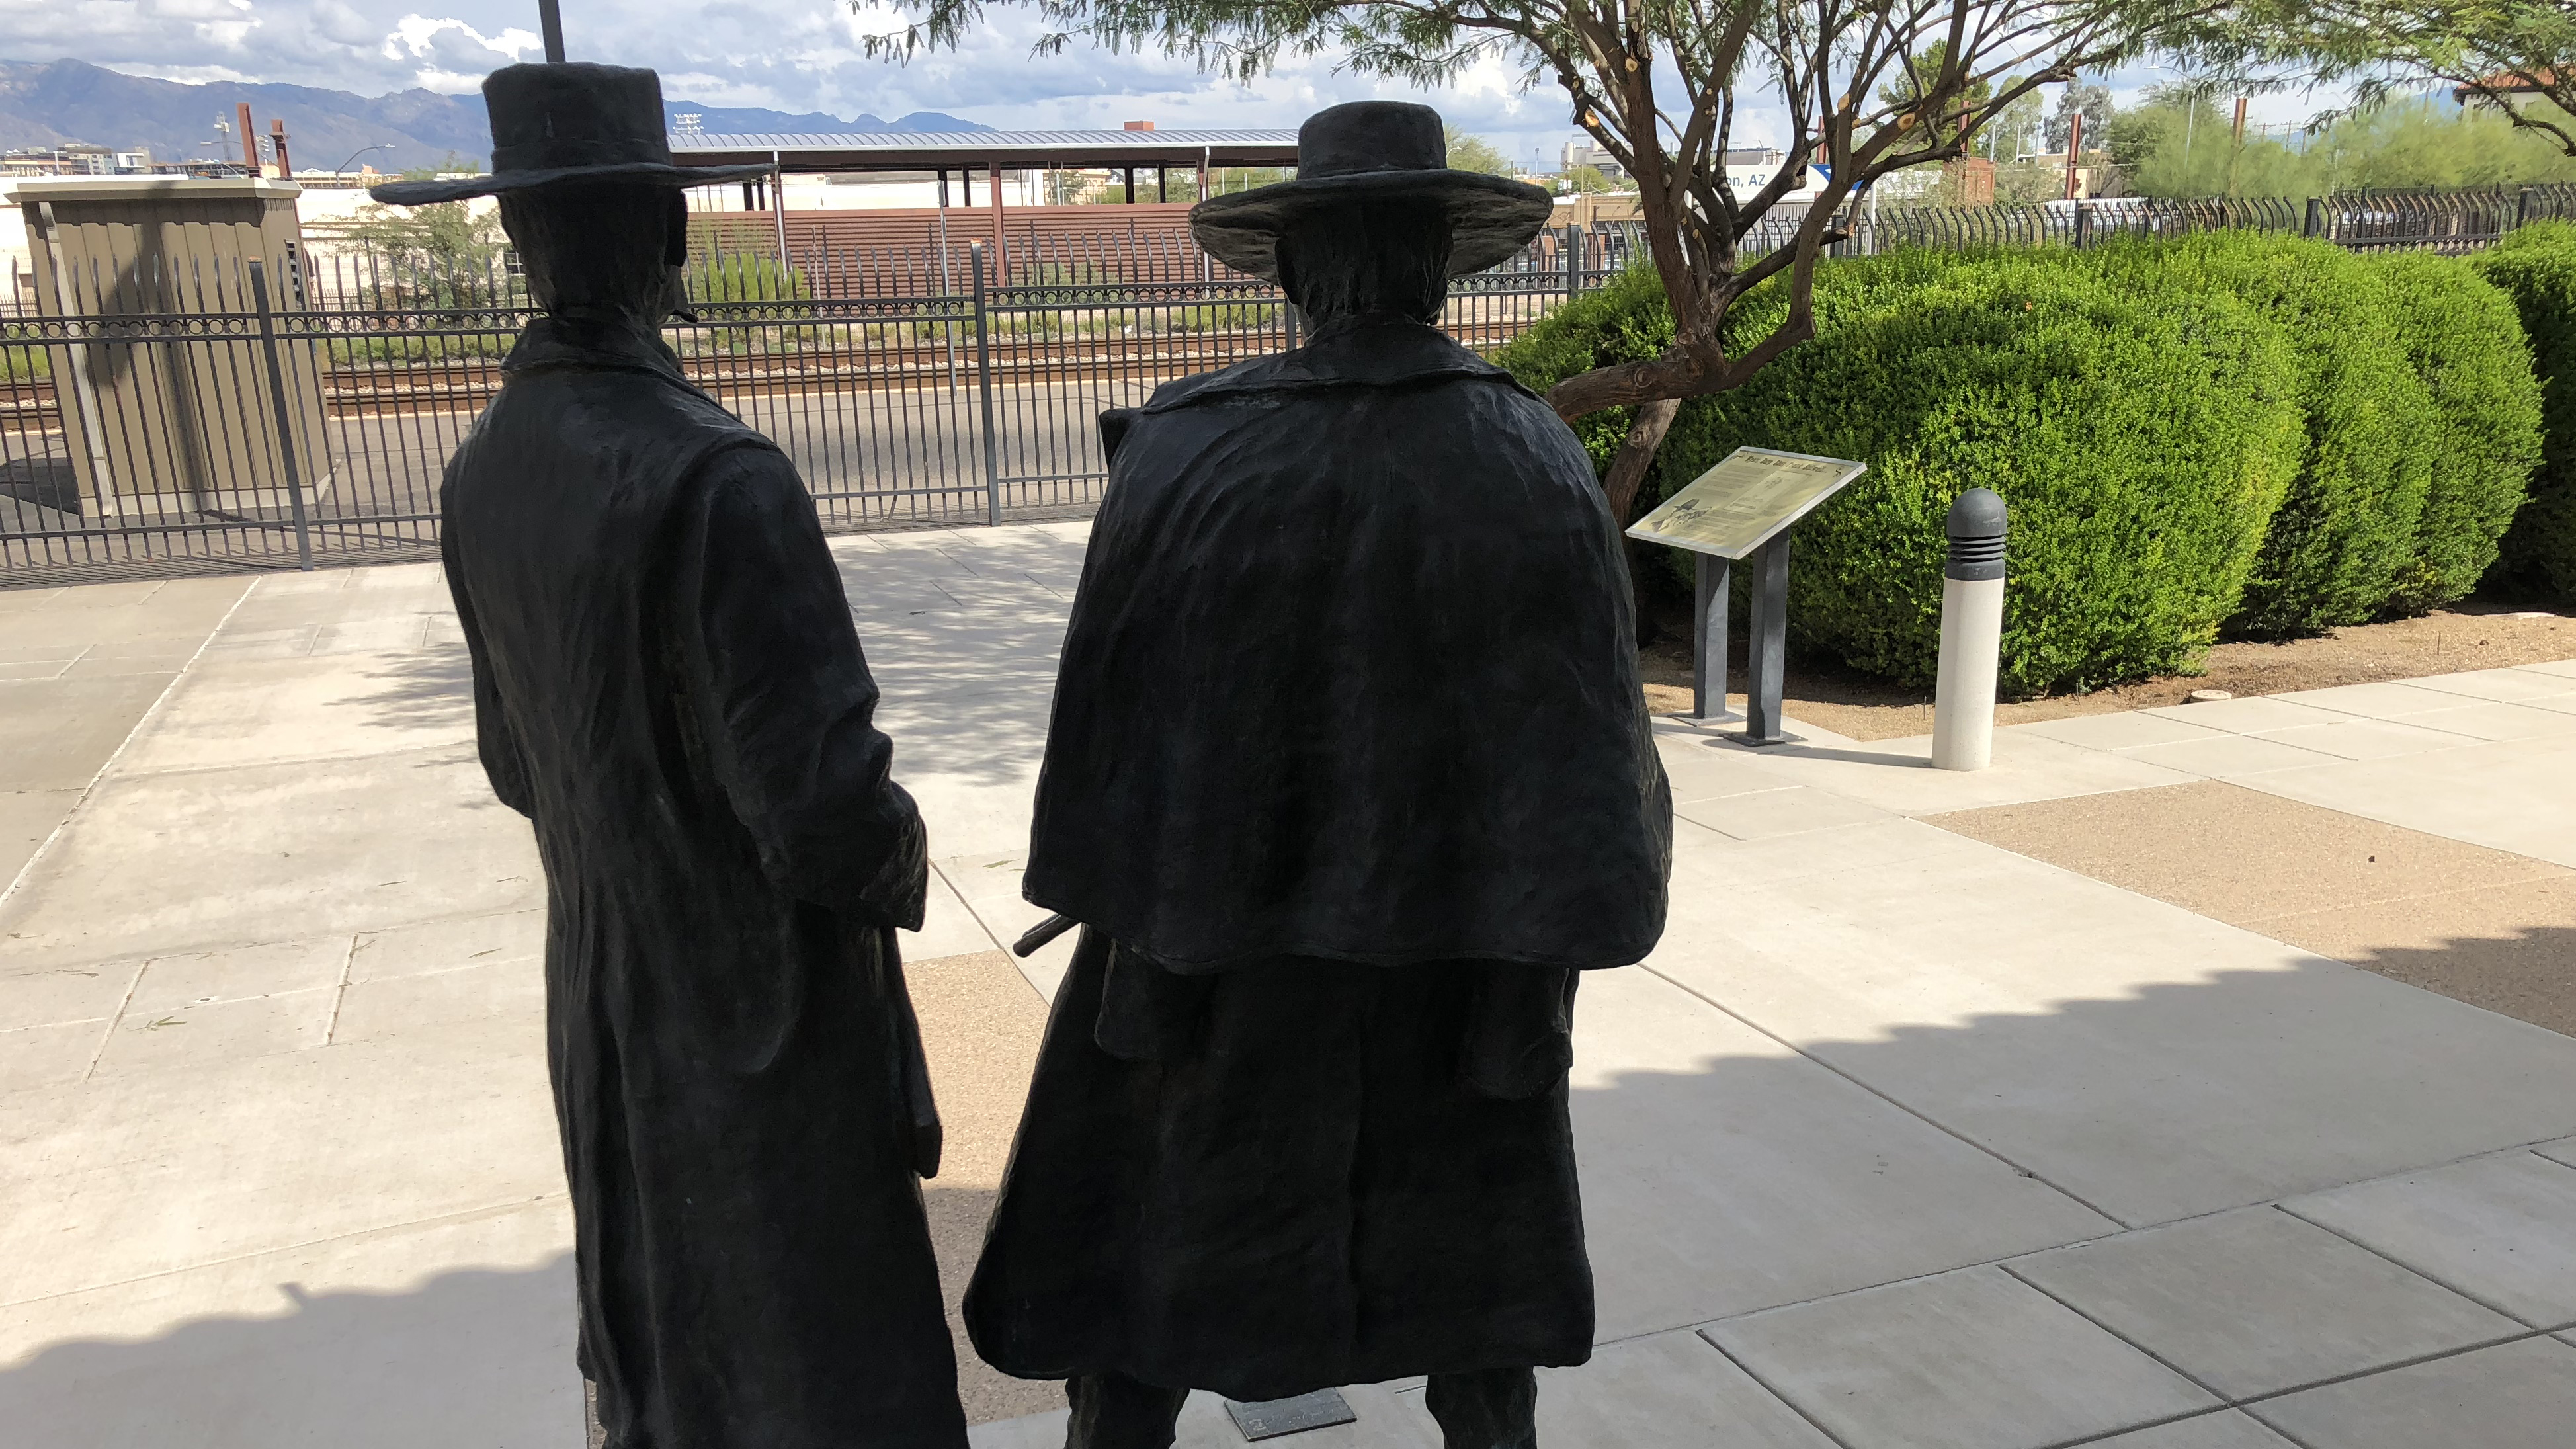 Earp Holliday Statue from Behind